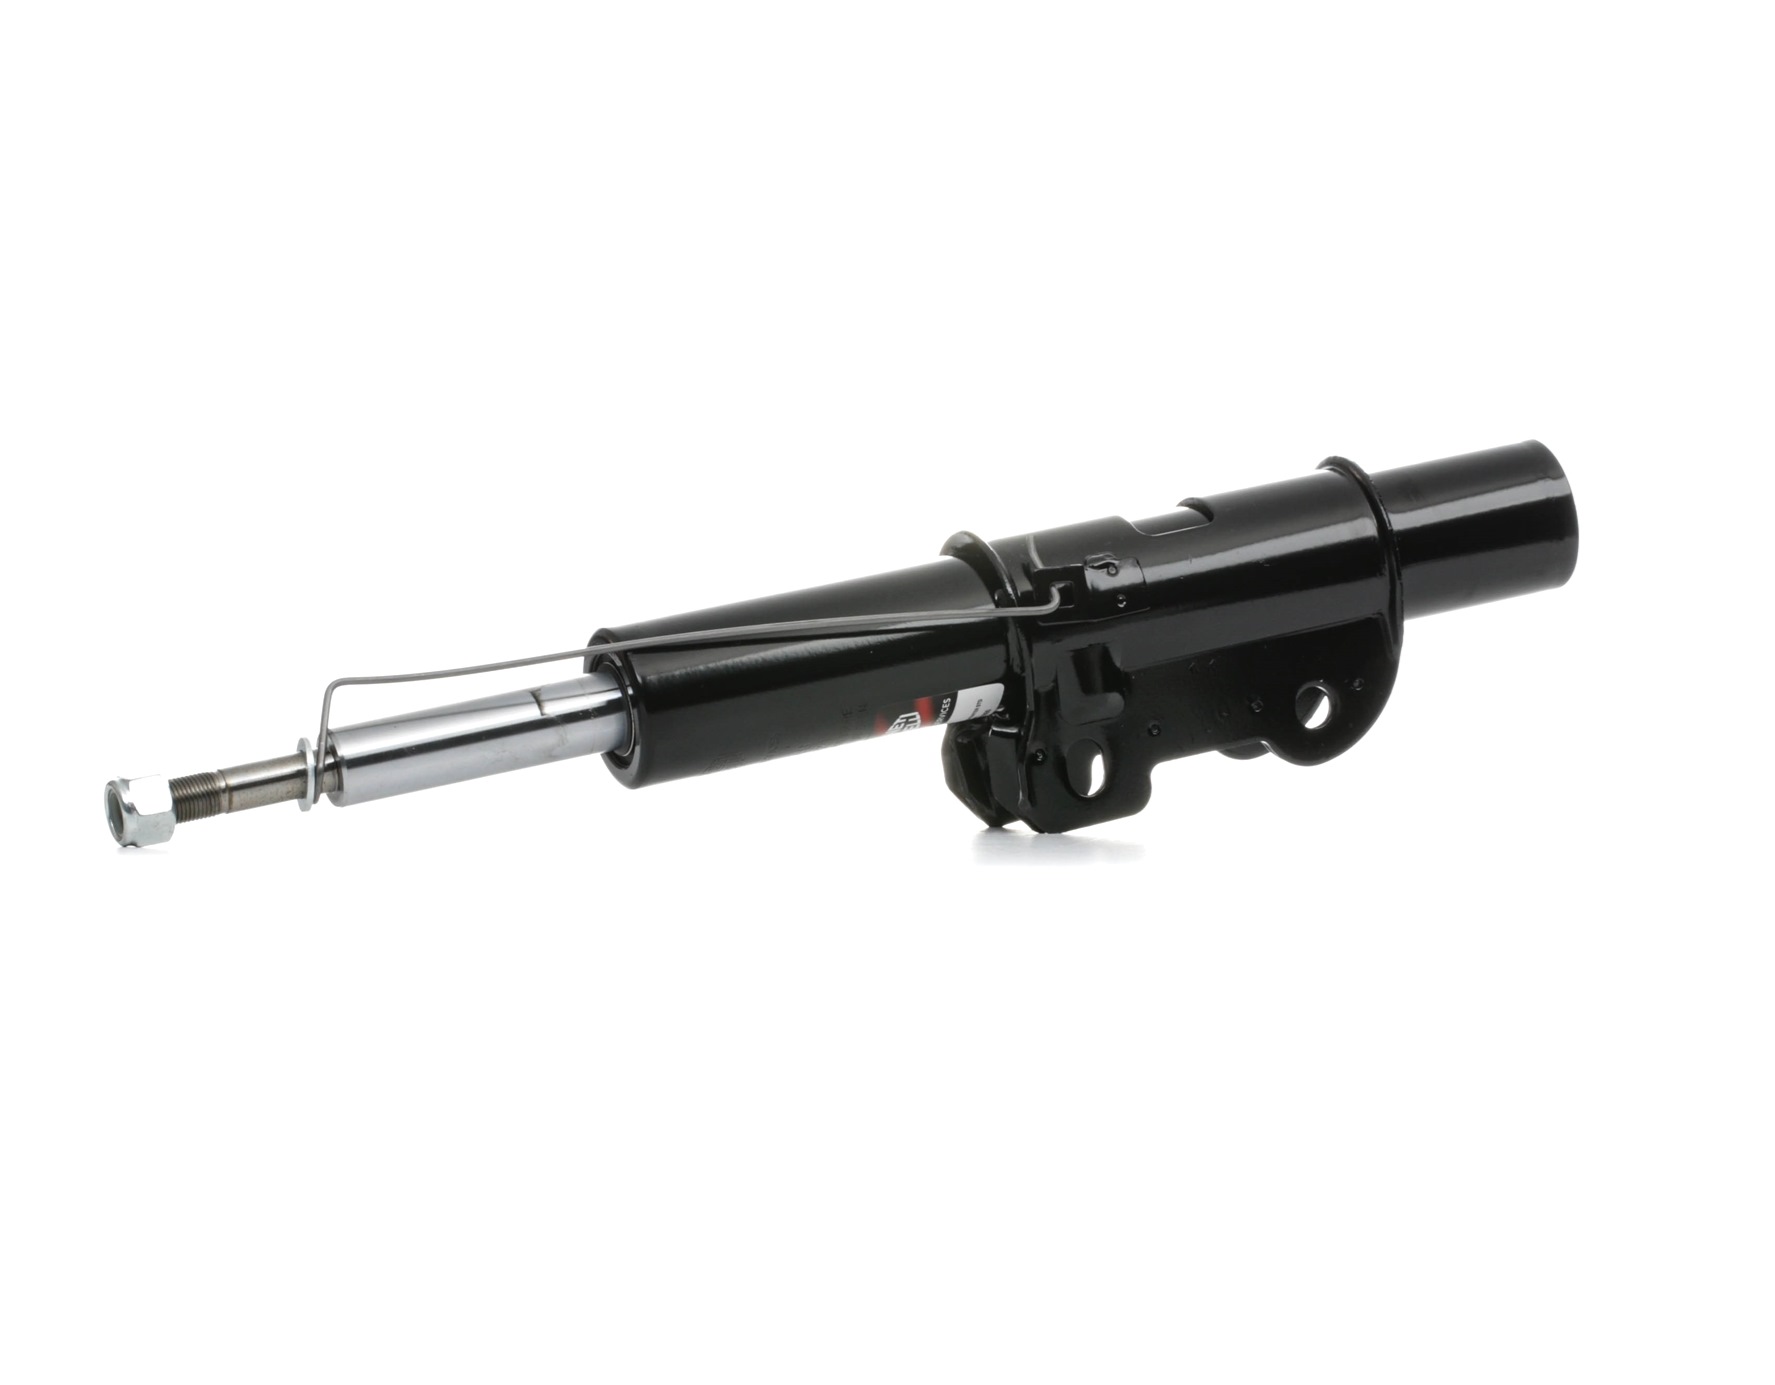 MAGNETI MARELLI 352744070000 Shock absorber Front Axle, Gas Pressure, Twin-Tube, Telescopic Shock Absorber, Top pin